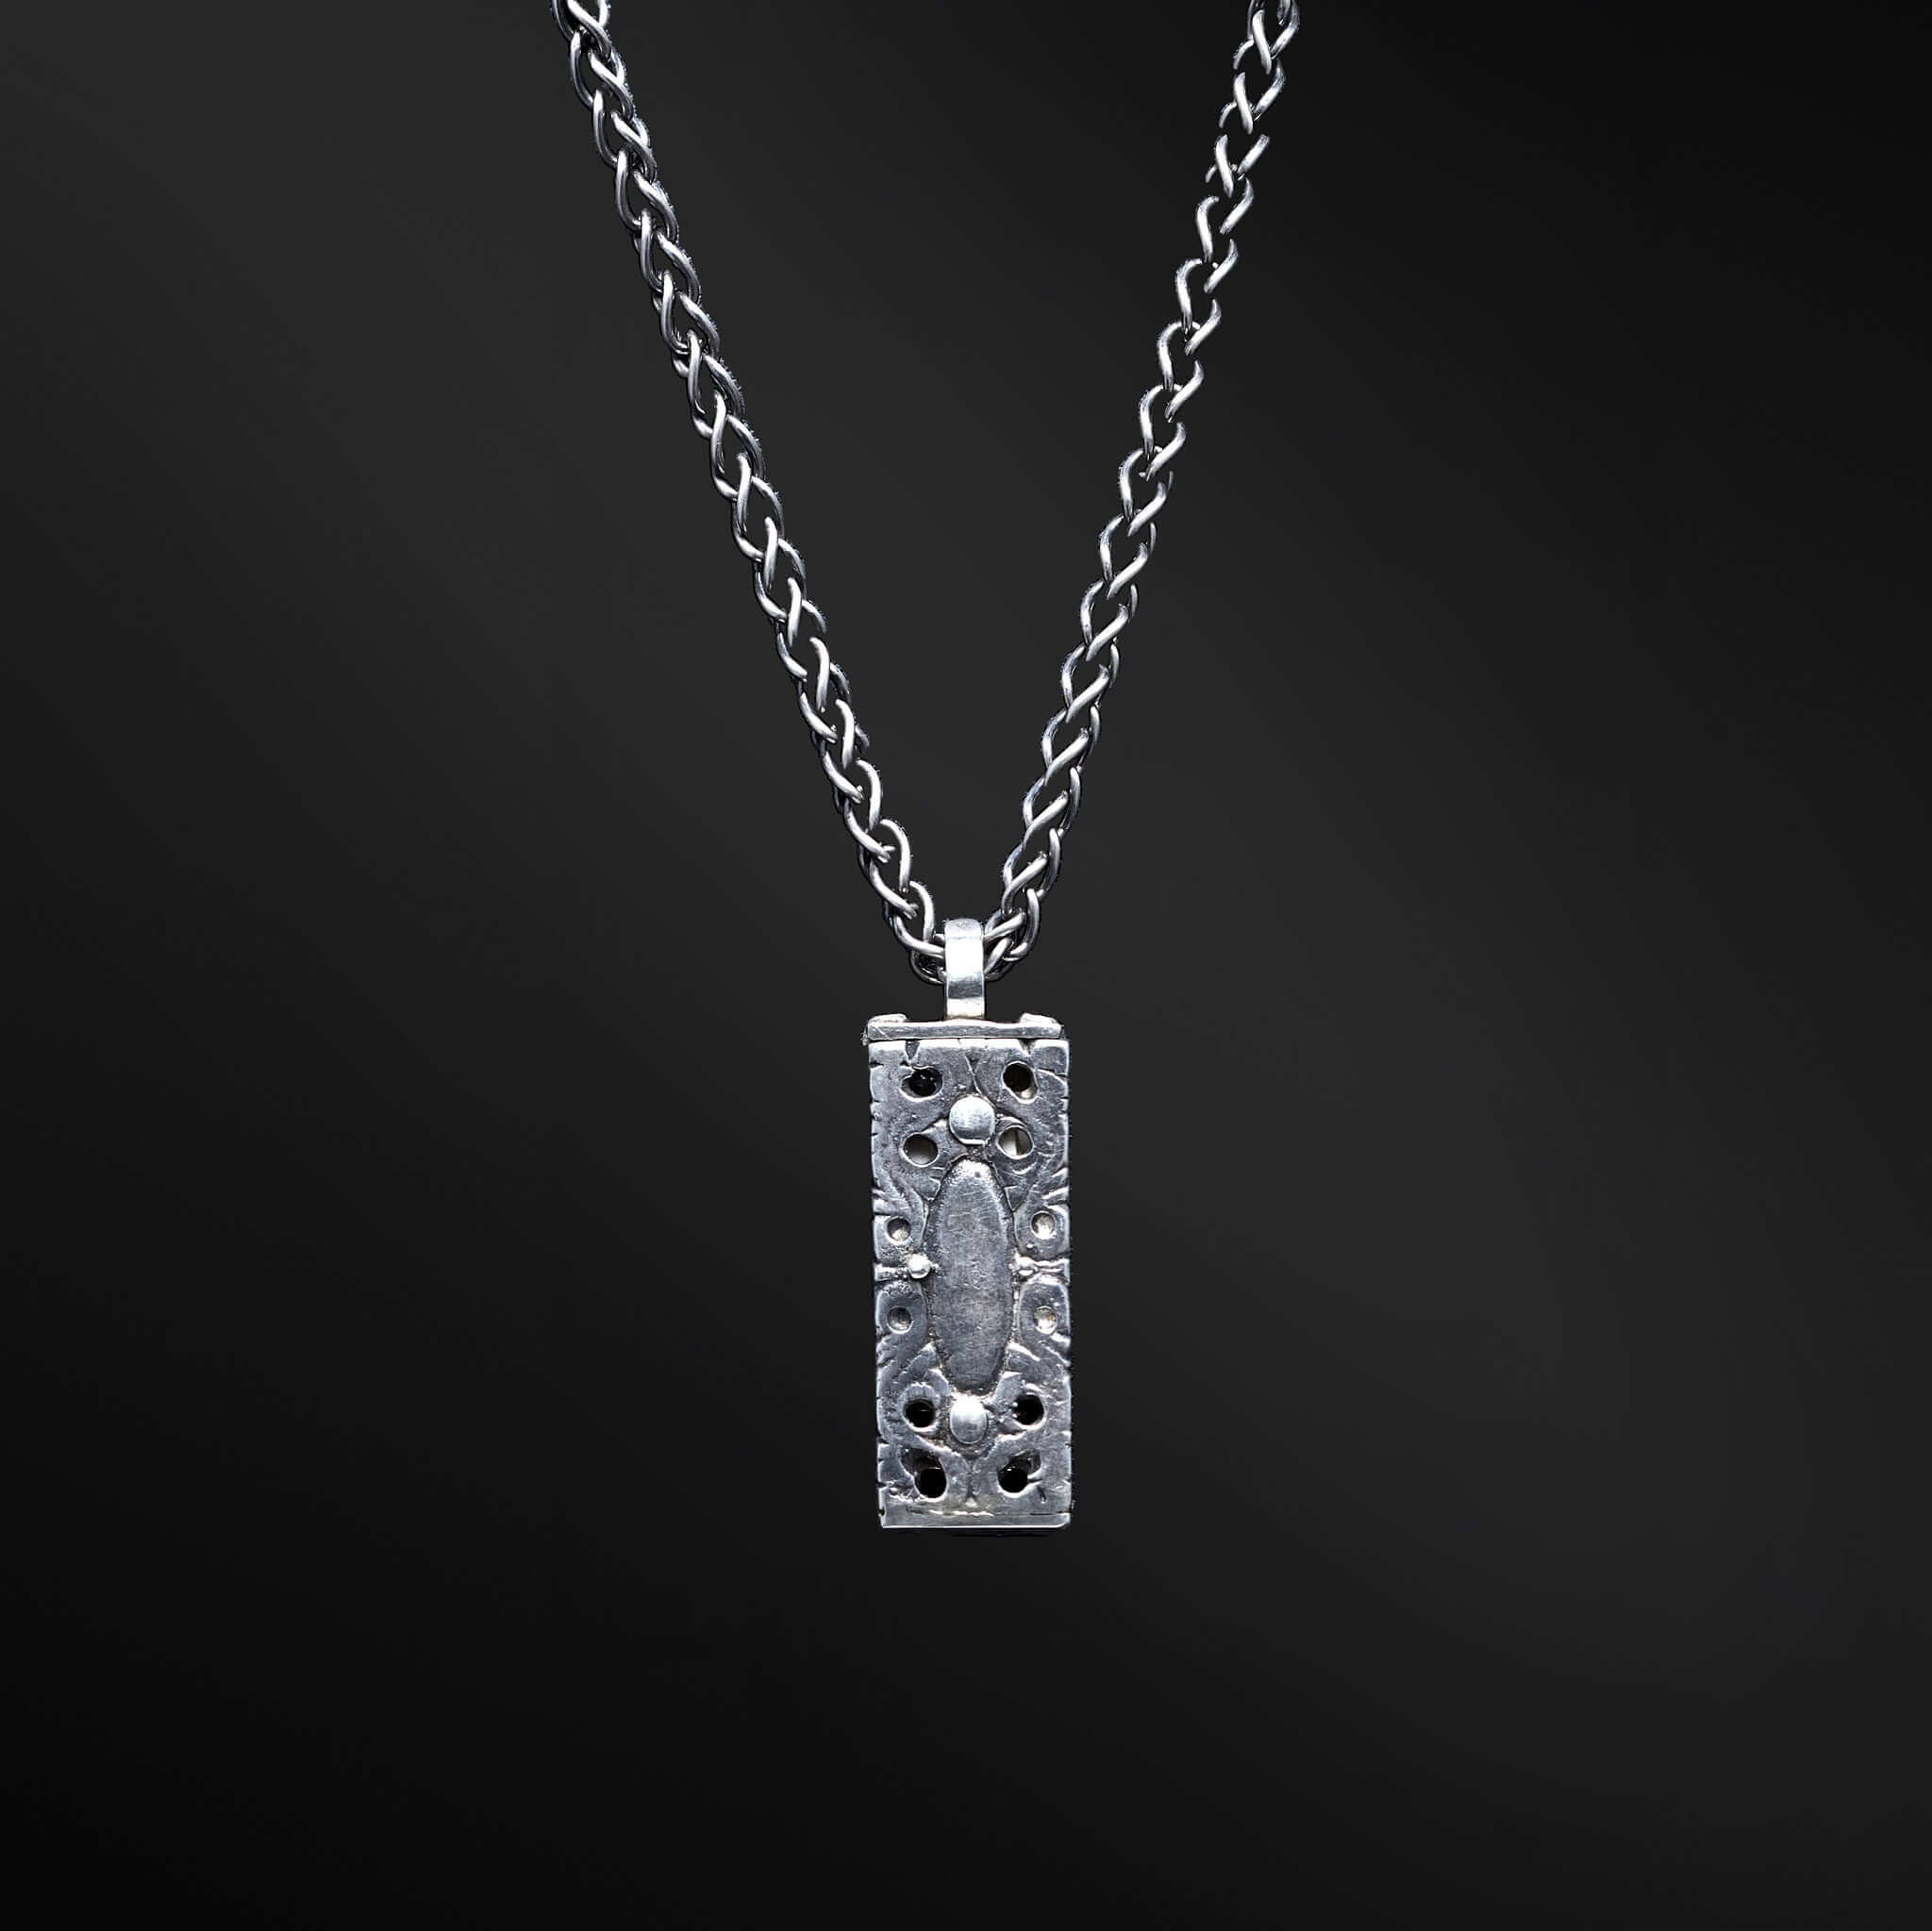 &quot;ARI Pendant: Embrace the essence of the Ari pendant, a truly remarkable accessory. Its captivating design conceals a hidden wisdom that adds depth and meaning to your personal style, making a profound statement about who you are.&quot;